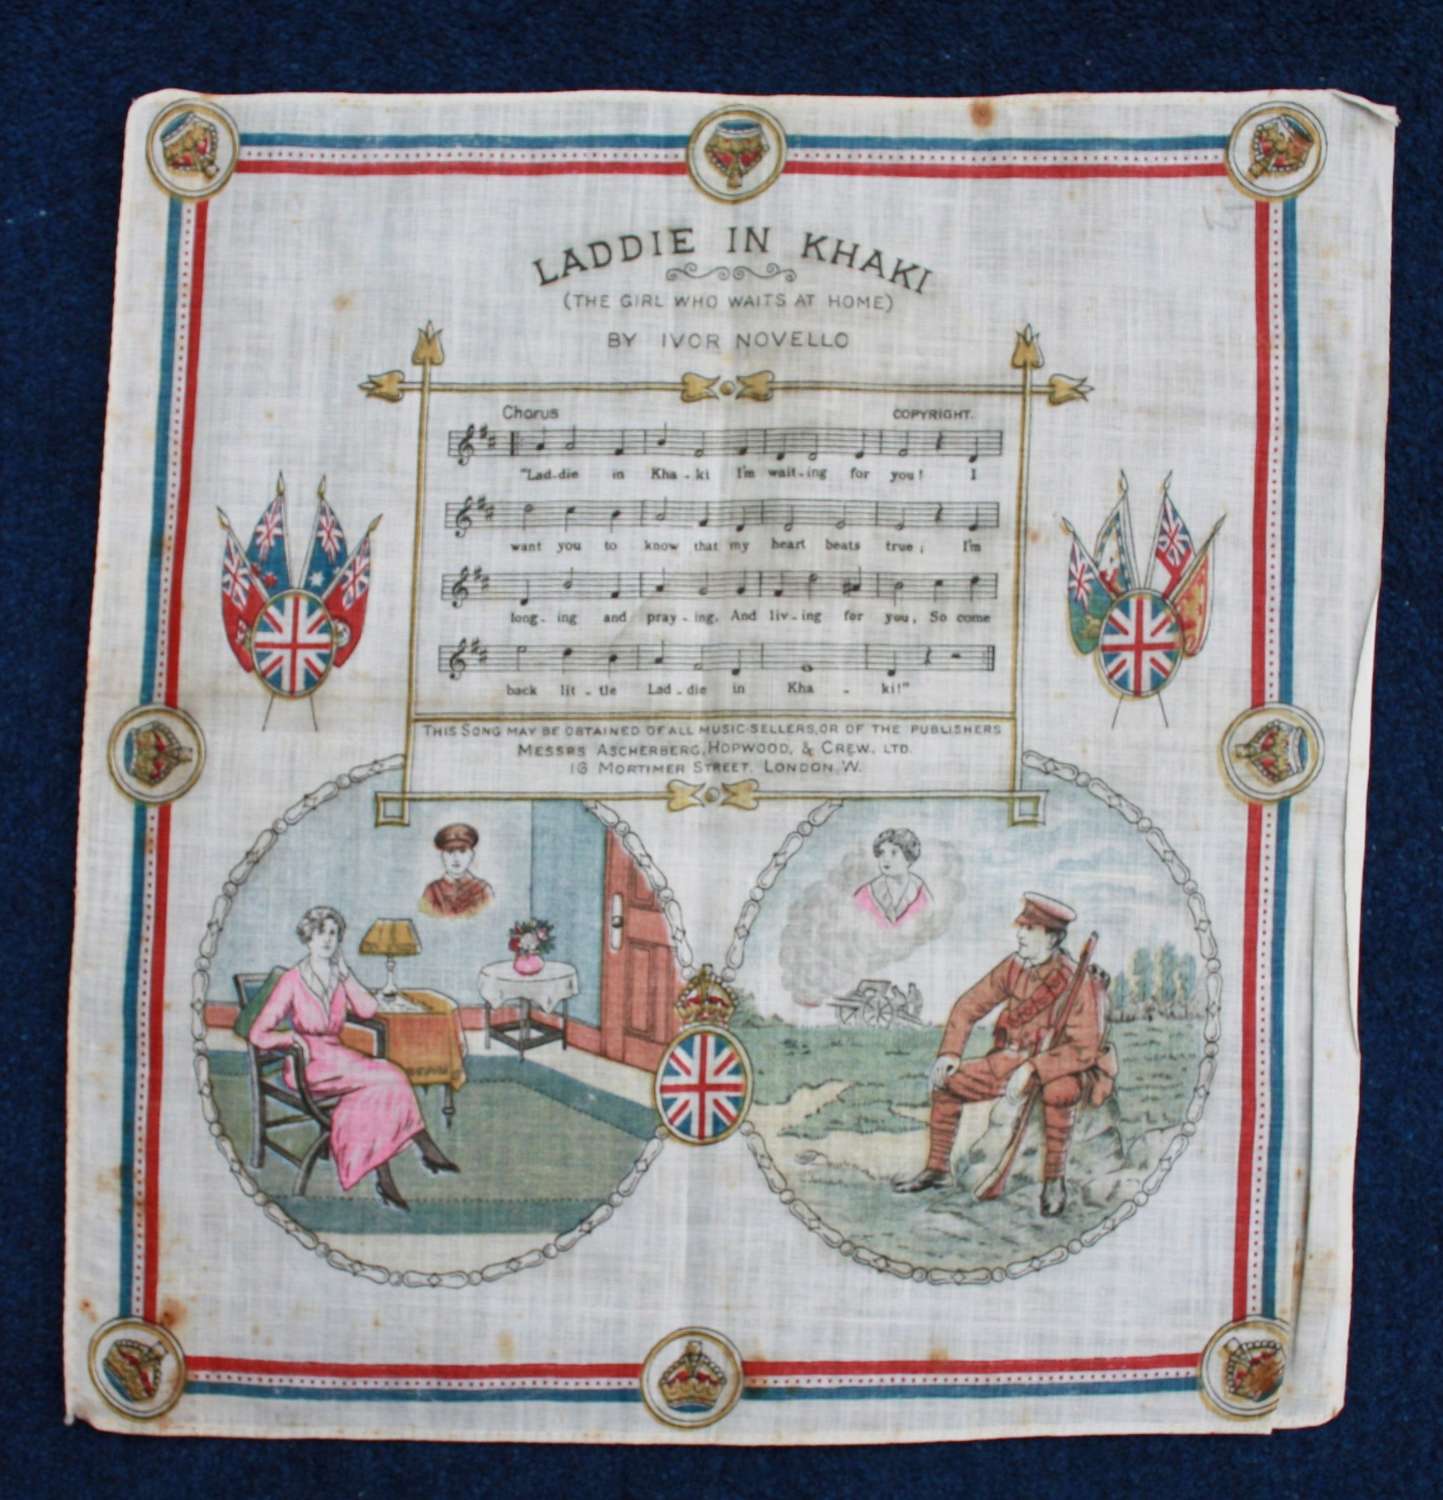 WW1 printed cotton handkerchief British Soldier dreaming of home